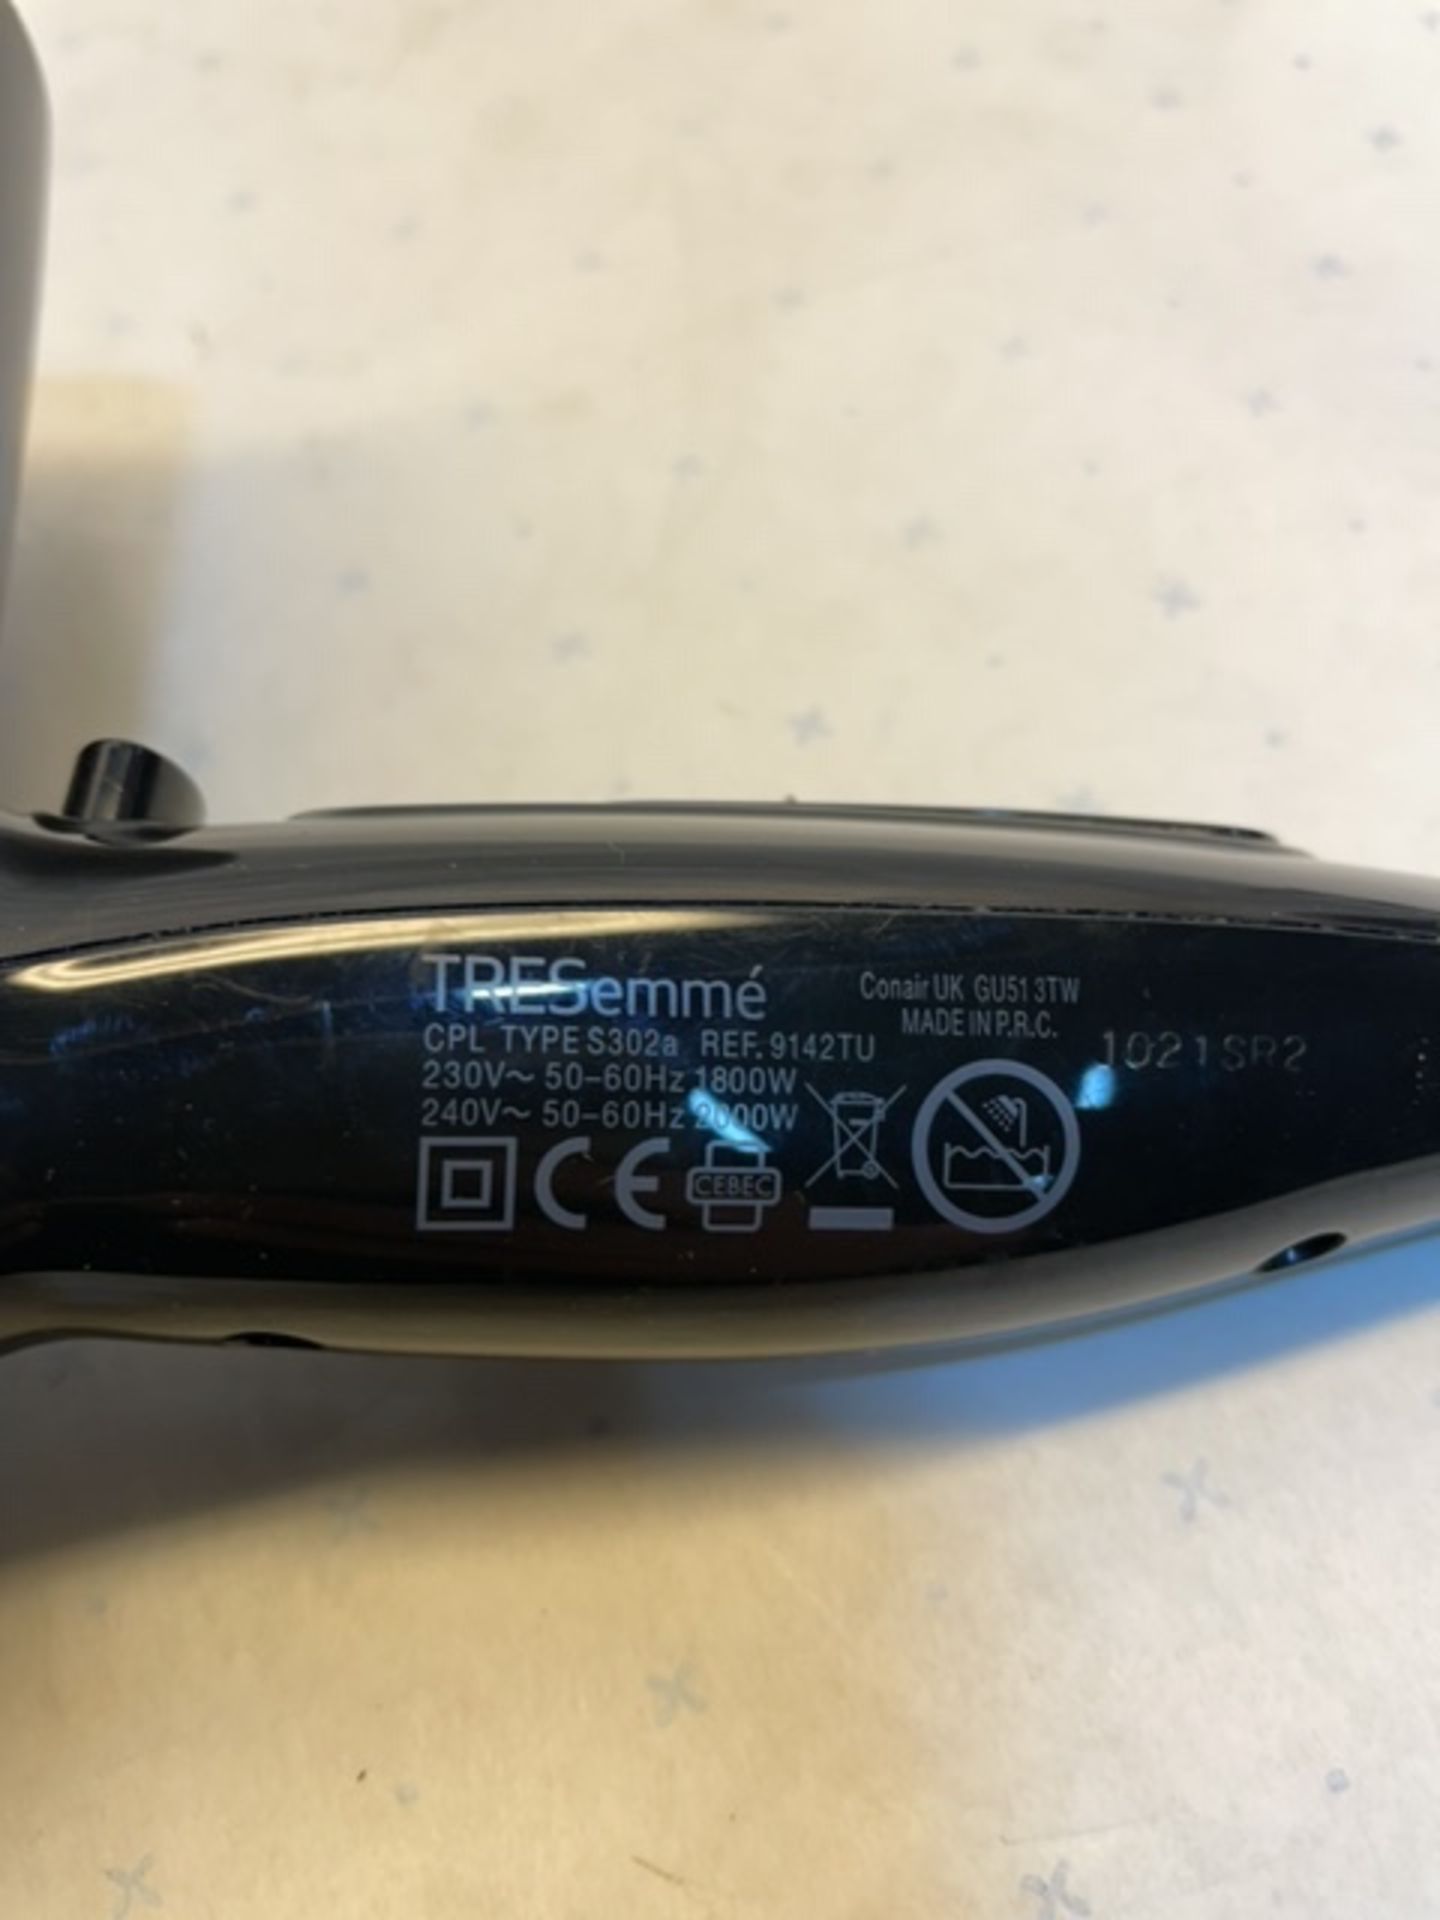 TRESemme Hairdryer - Image 3 of 3